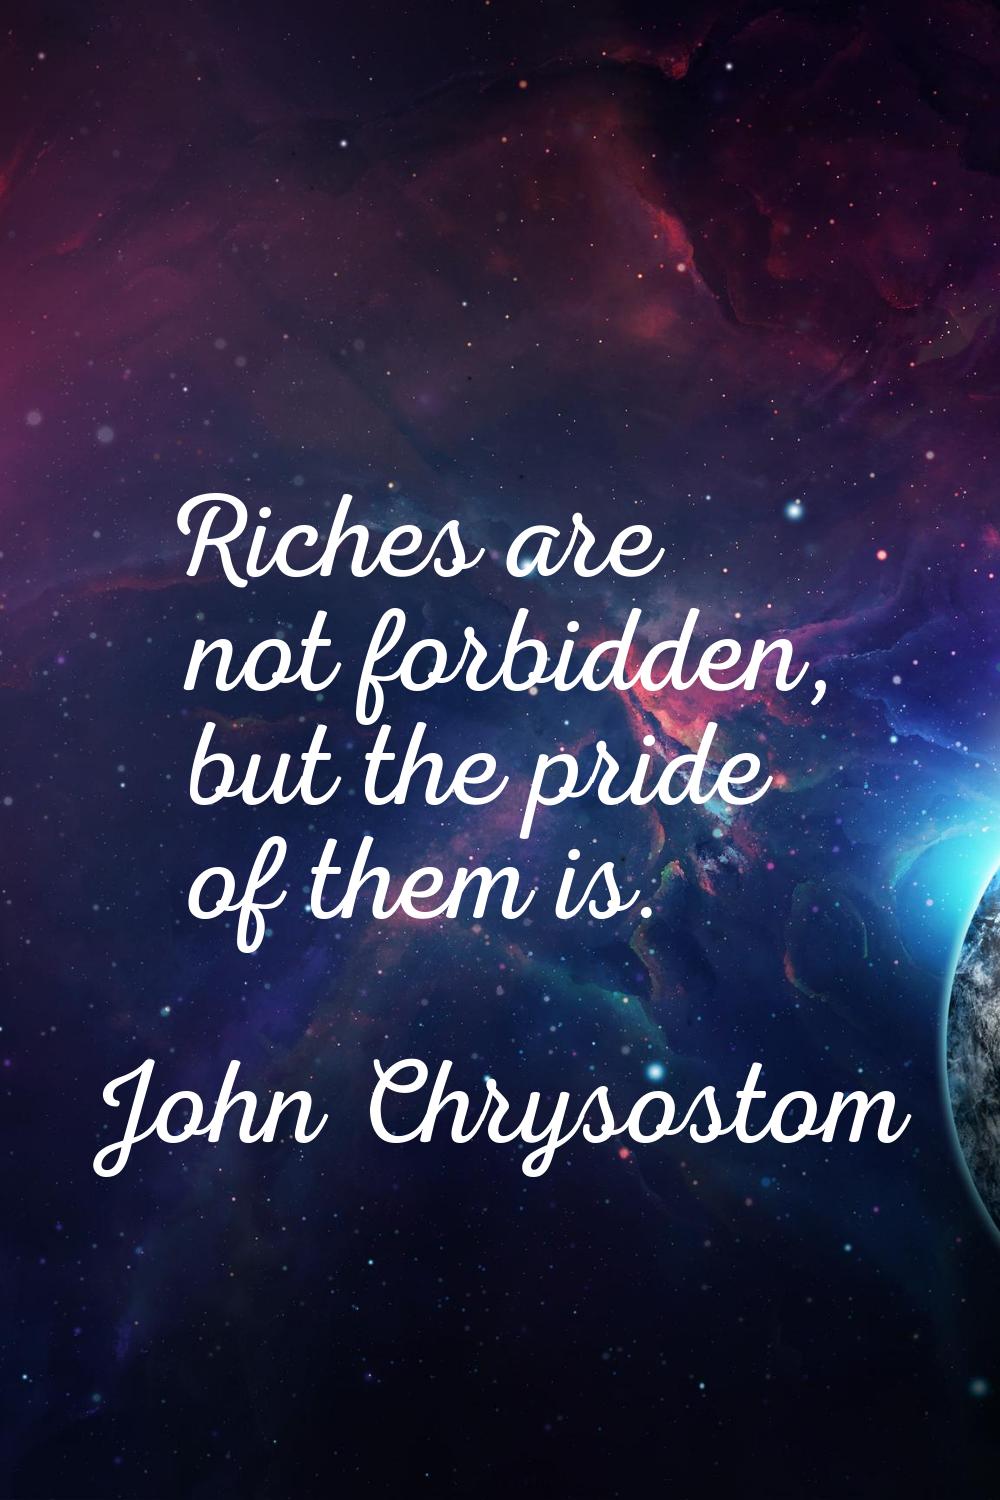 Riches are not forbidden, but the pride of them is.